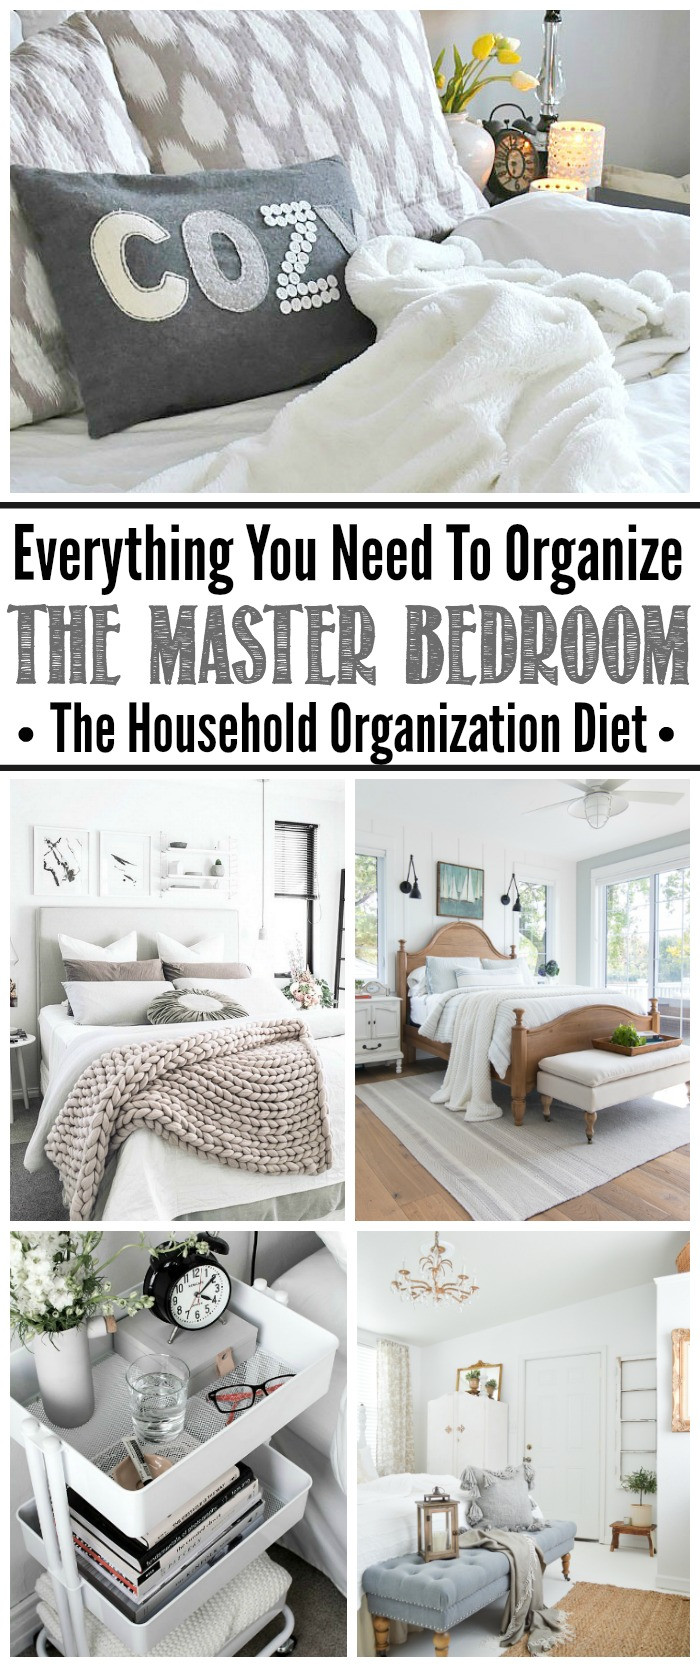 Organization Ideas For Bedroom
 How to Organize the Master Bedroom September HOD Clean